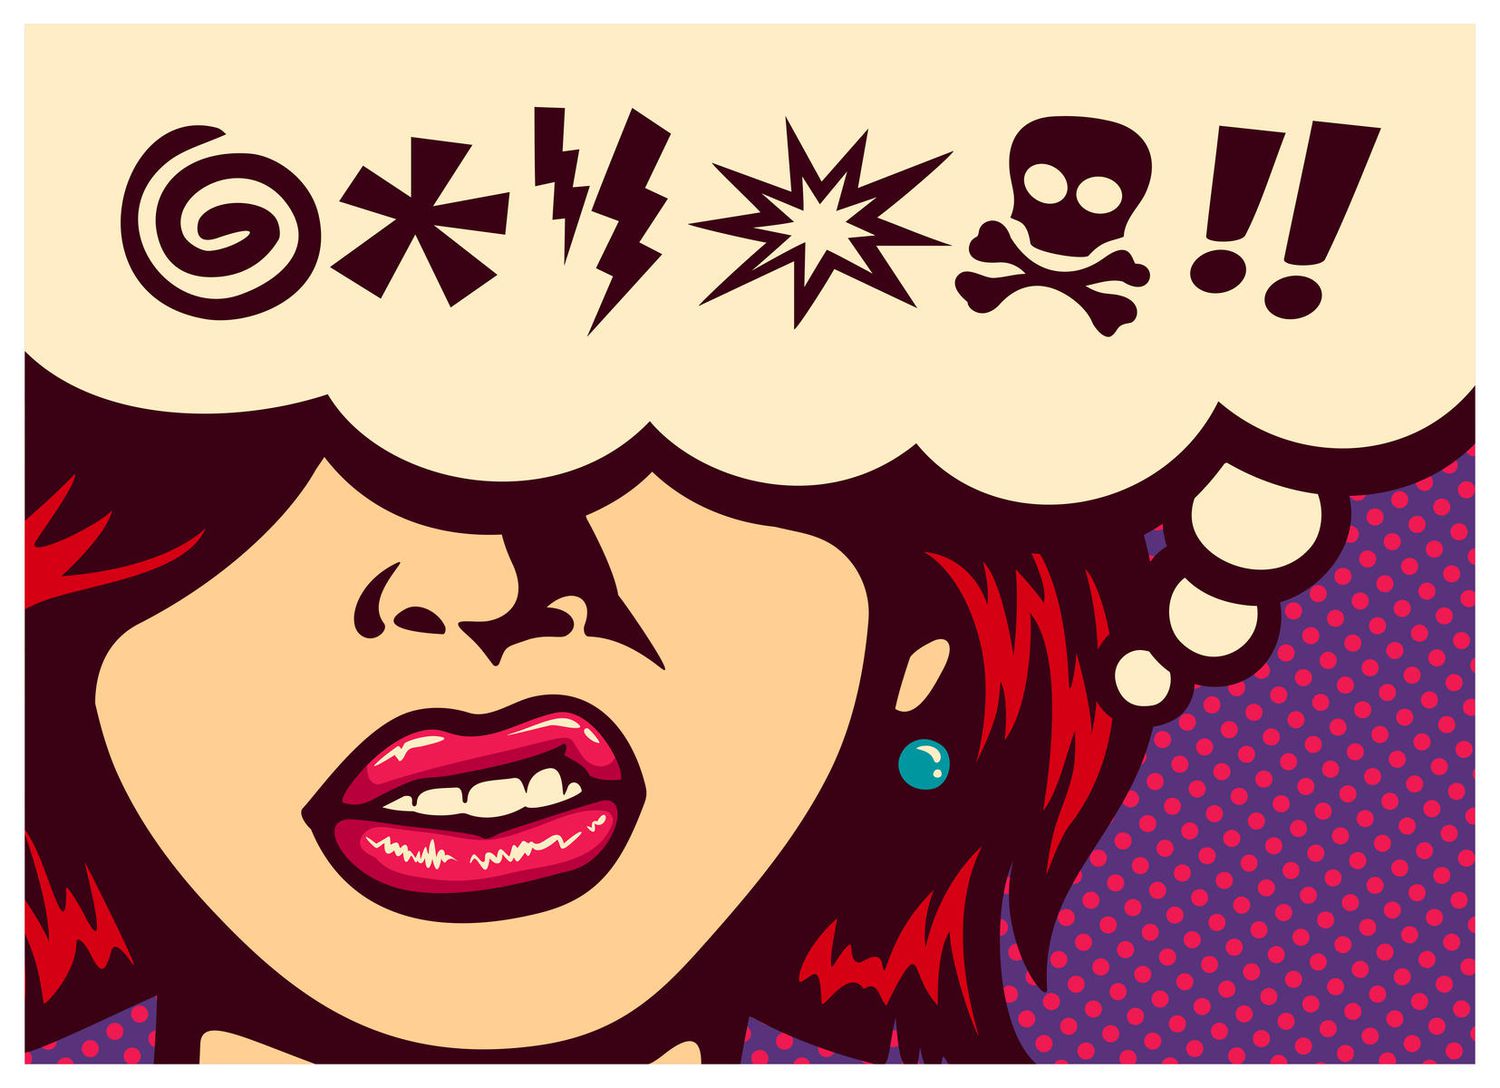 Pop art style comics panel angry woman with speech bubble and swear words symbols